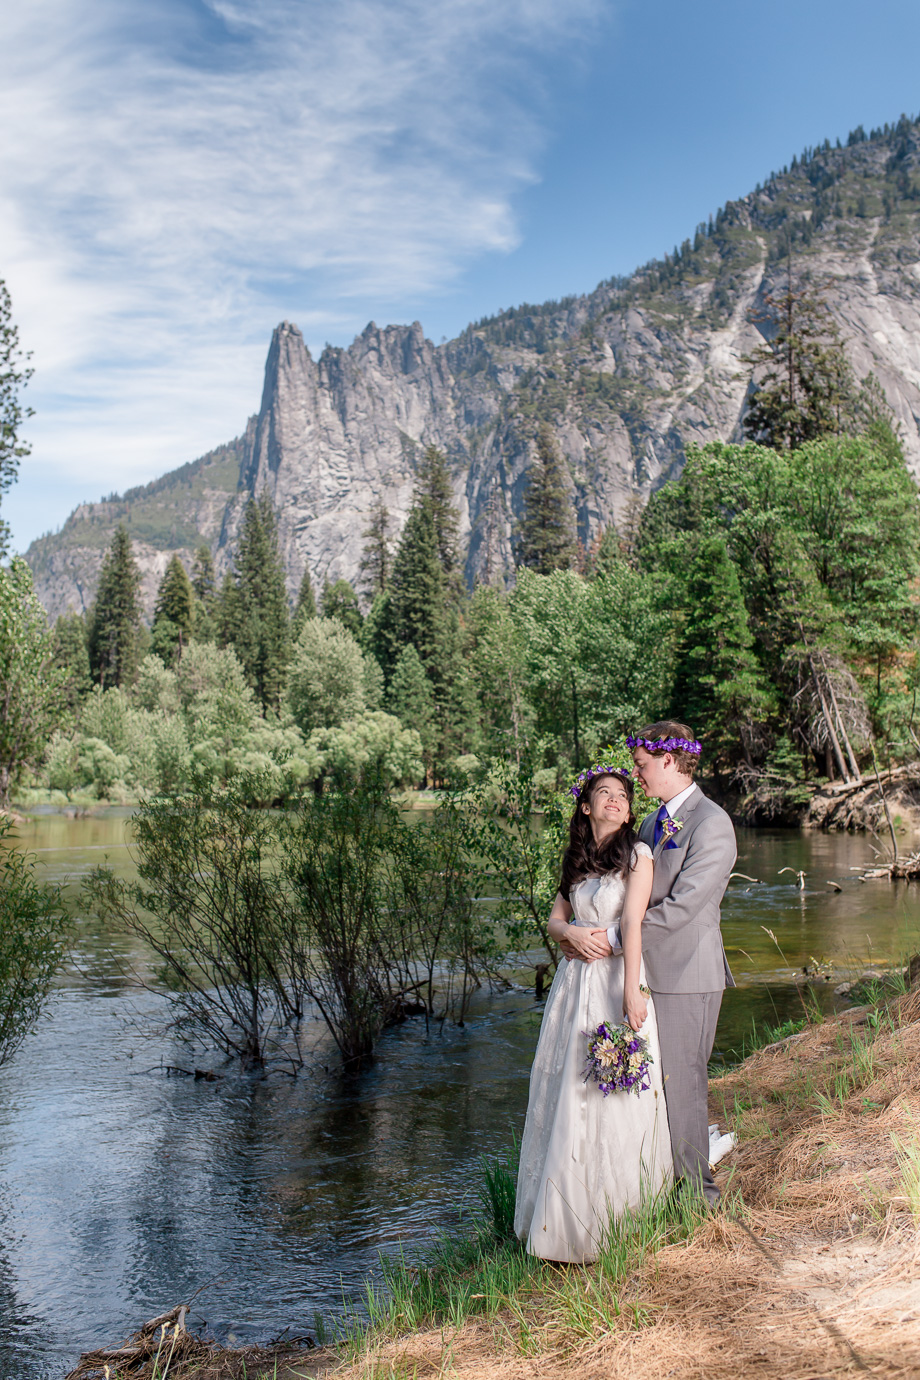 wedding at Merced River in Yosemite looking up at Cathedral Point